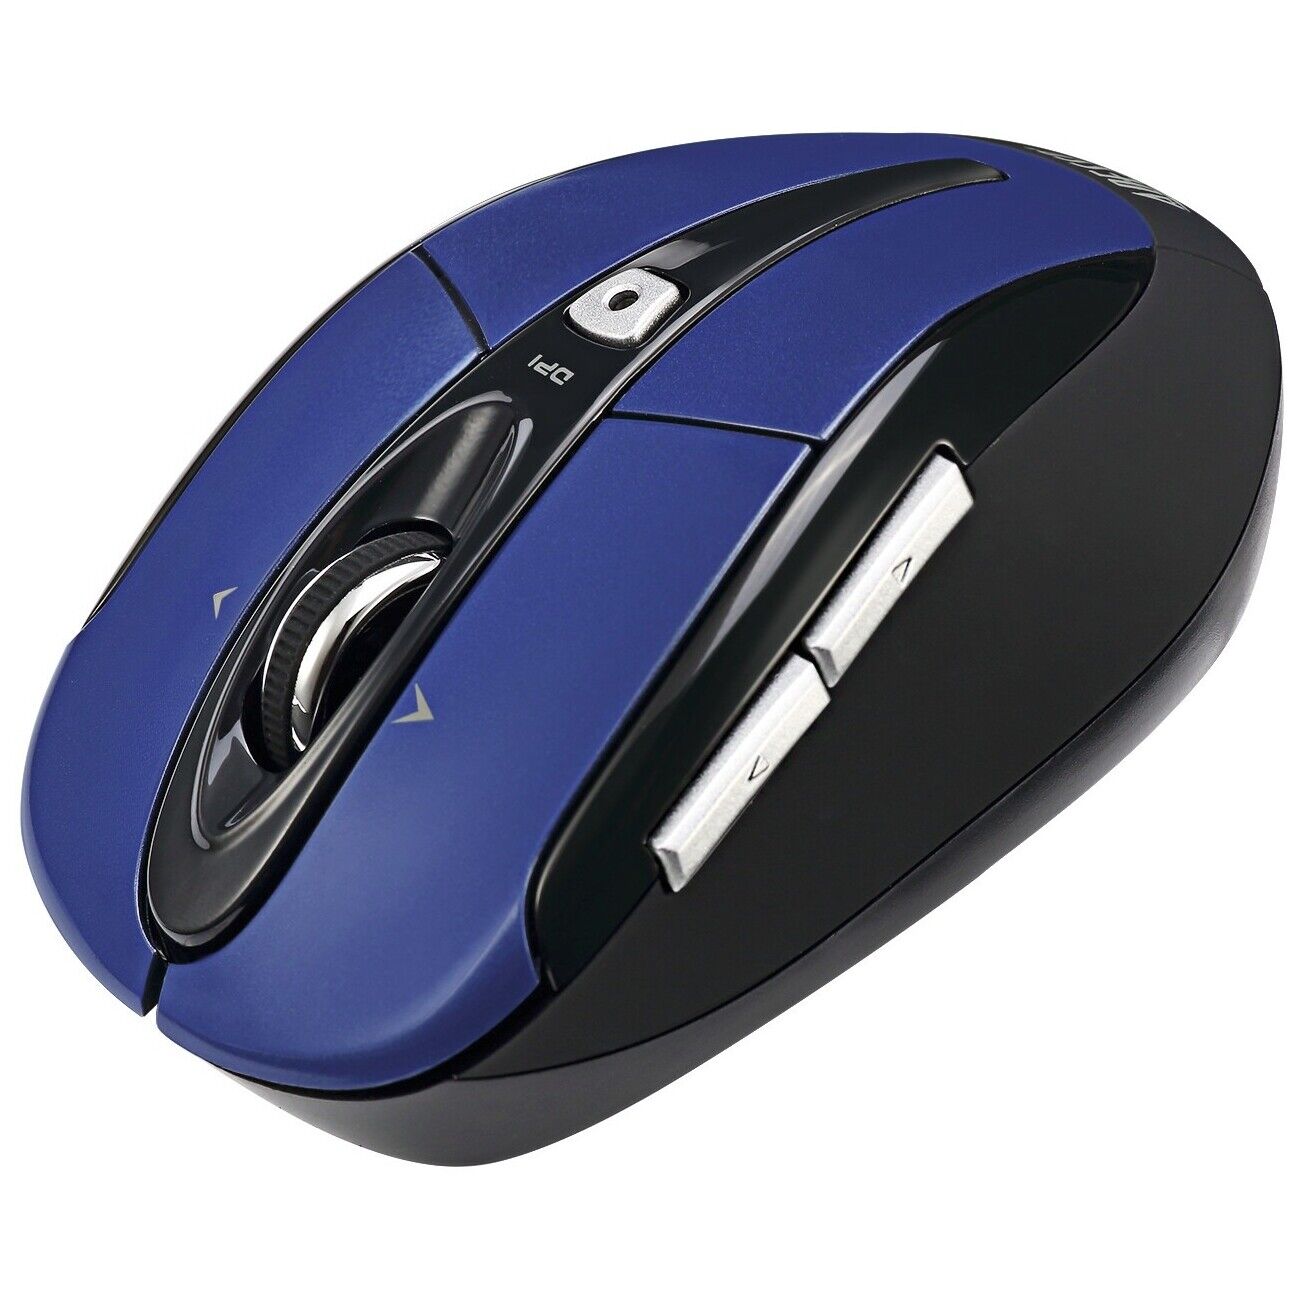 Adesso iMouse S60L - 2.4 GHz Wireless Programmable Nano Mouse (IMOUSES60L)